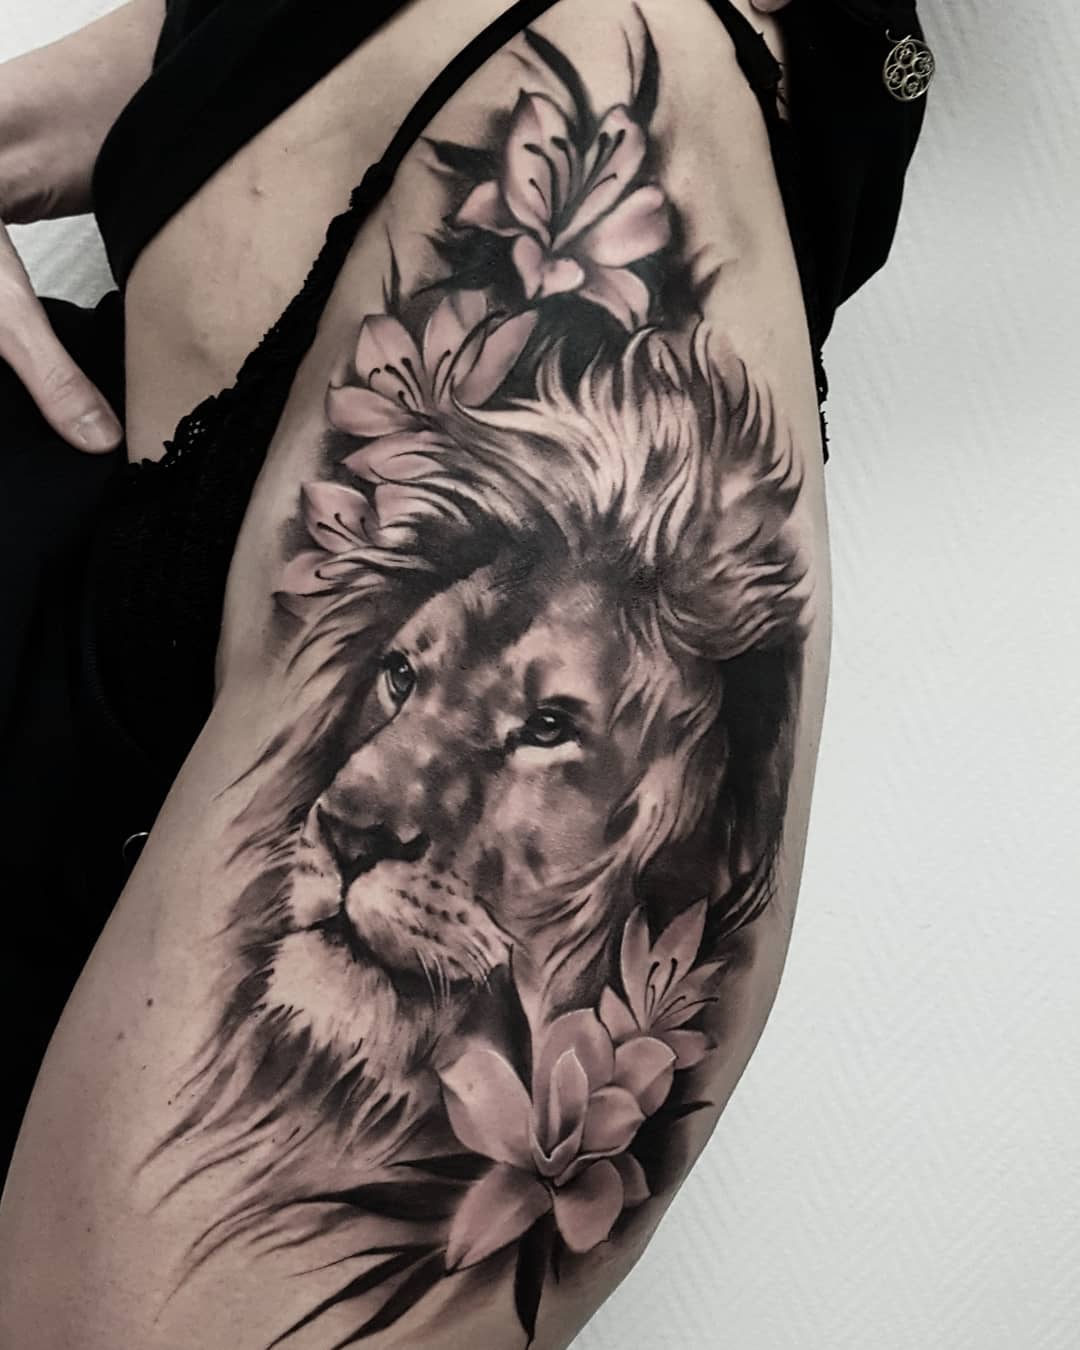 Love ink  Purrrty lion tattoo and flowers on the thigh  Facebook